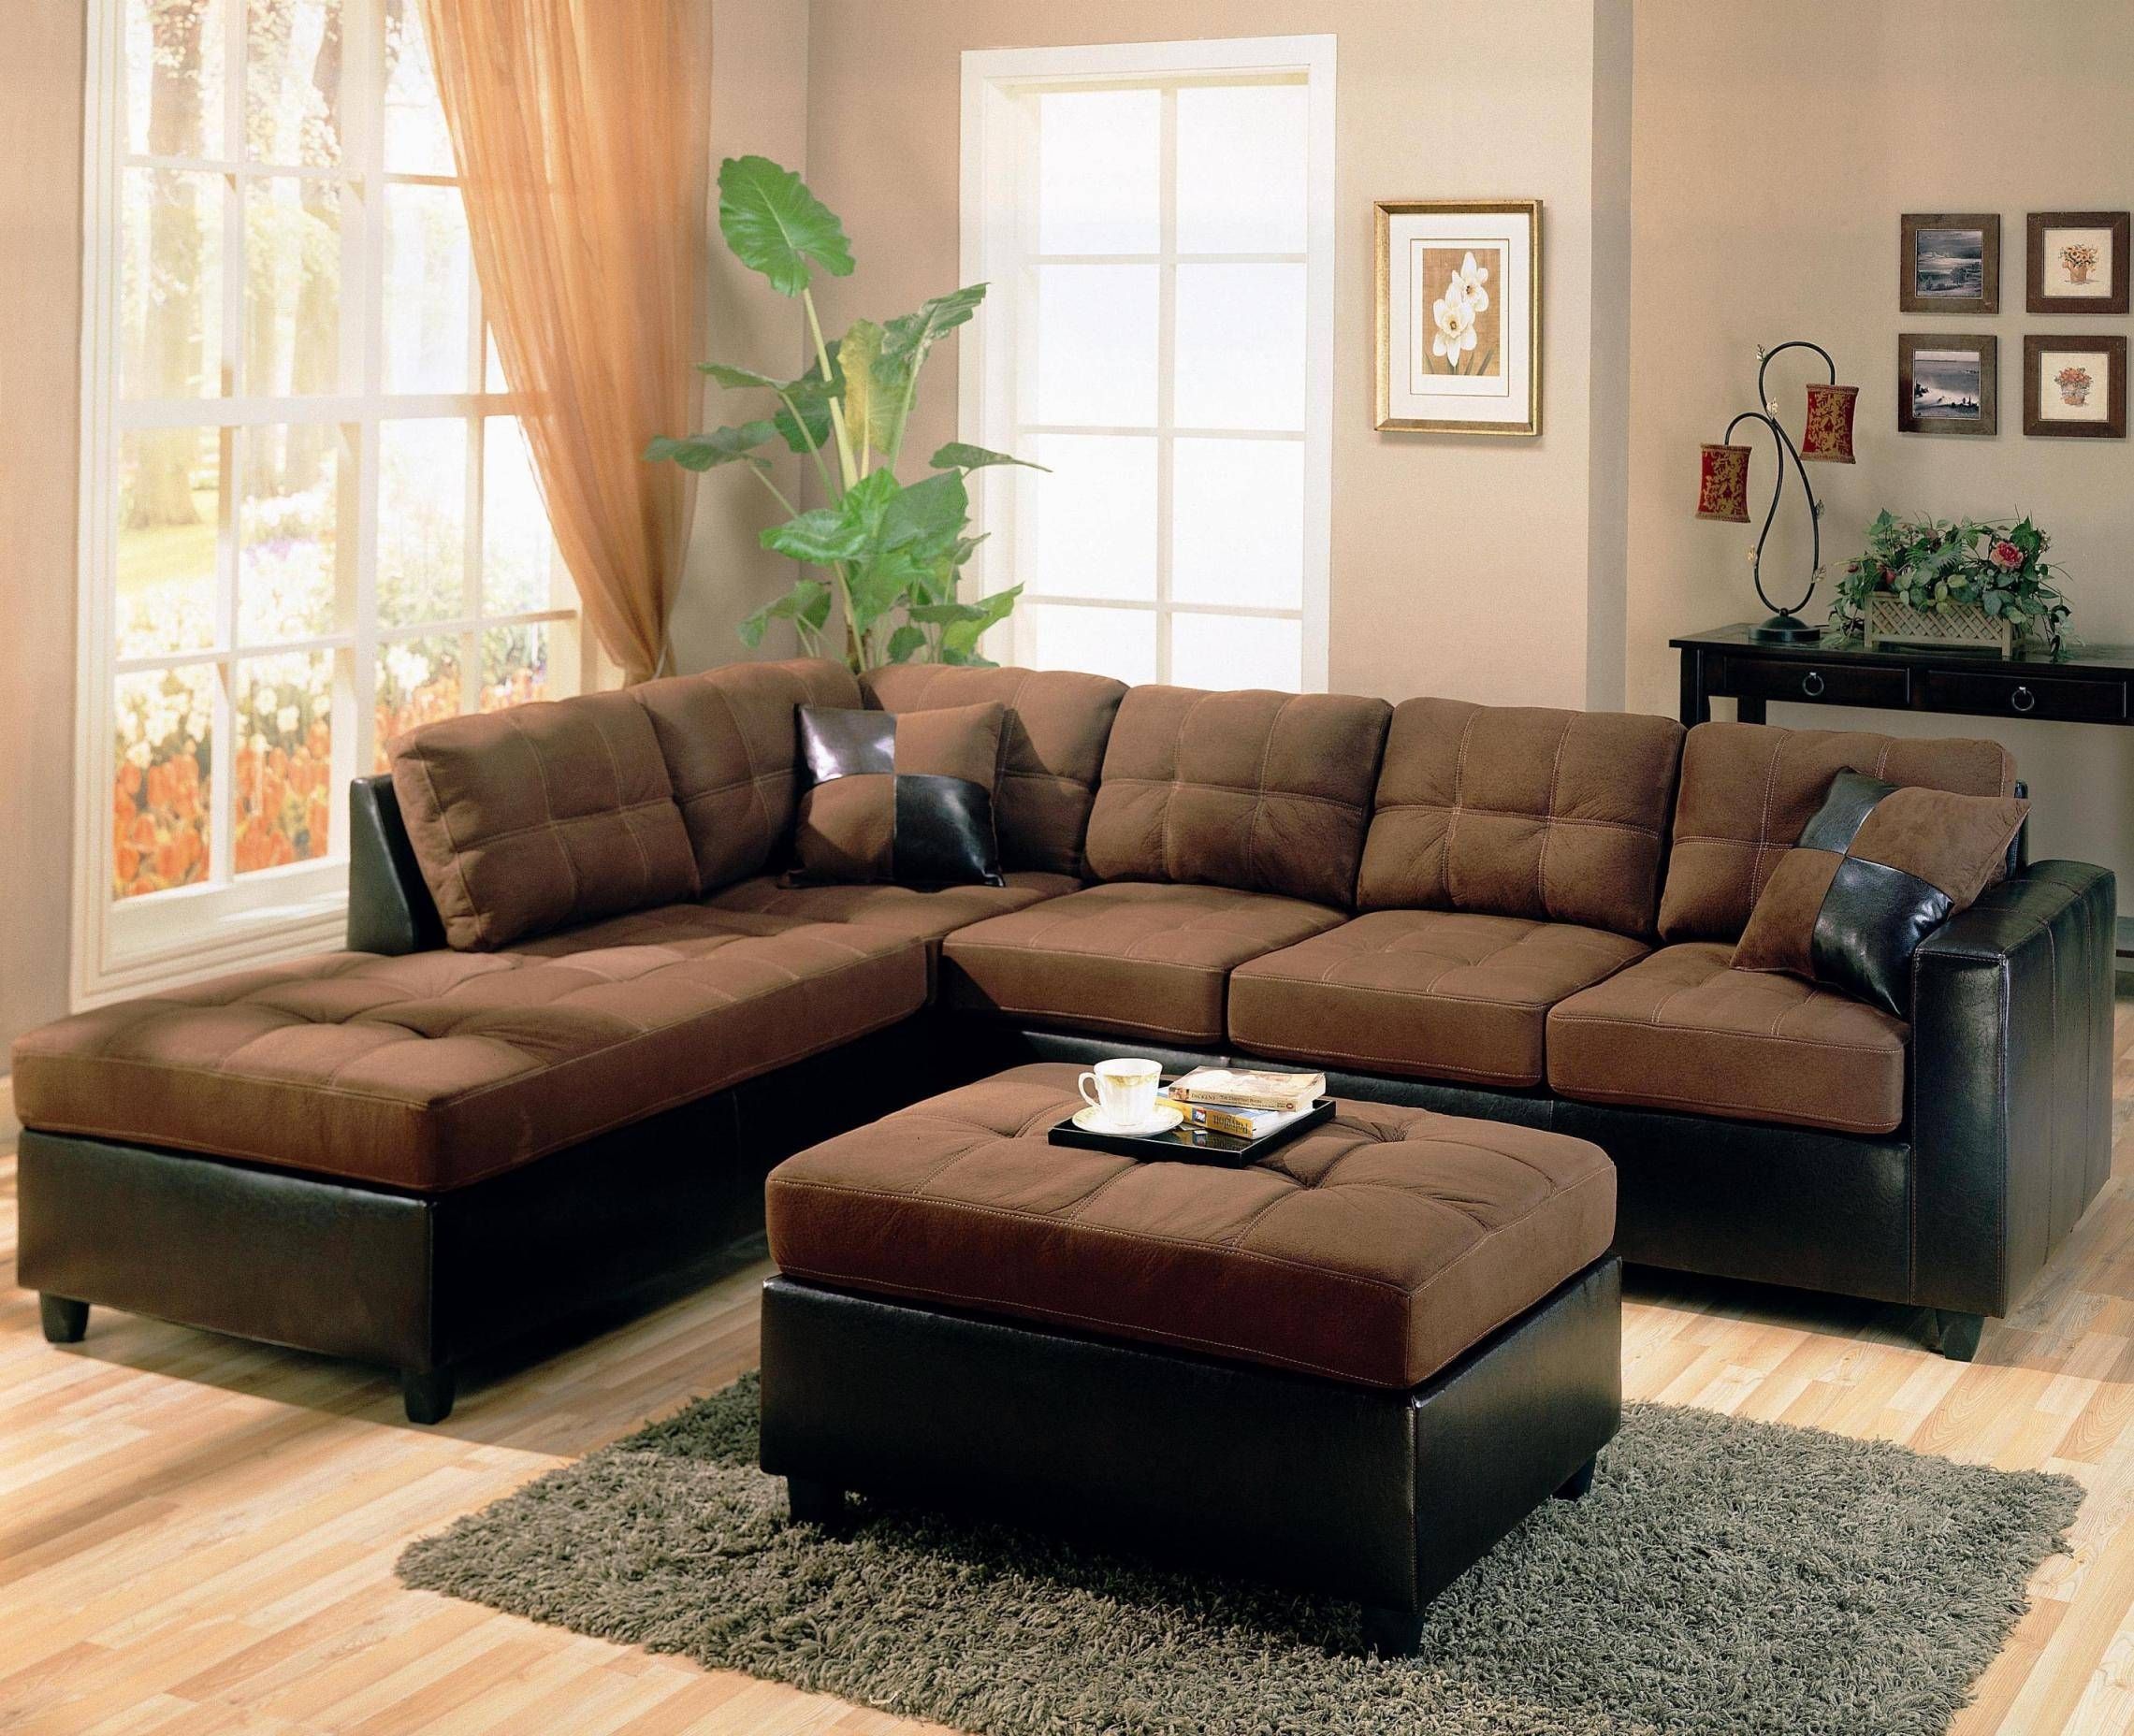 Backless Sectional Sofa – Cleanupflorida In Backless Sectional Sofa (View 4 of 30)